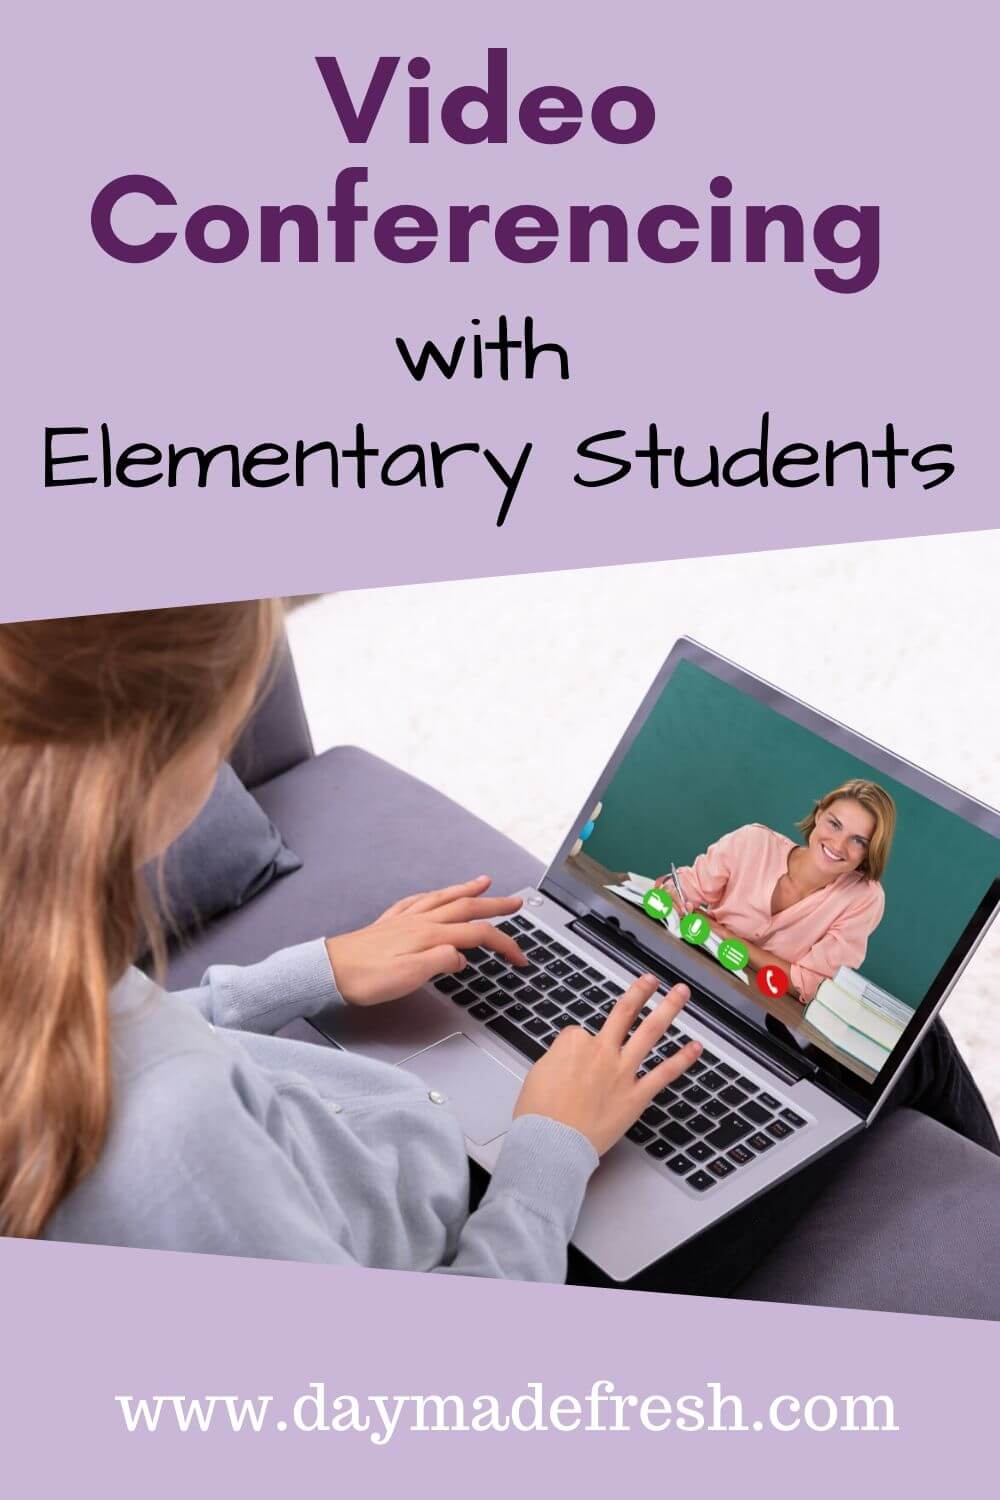 Video Conferencing with Elementary Students